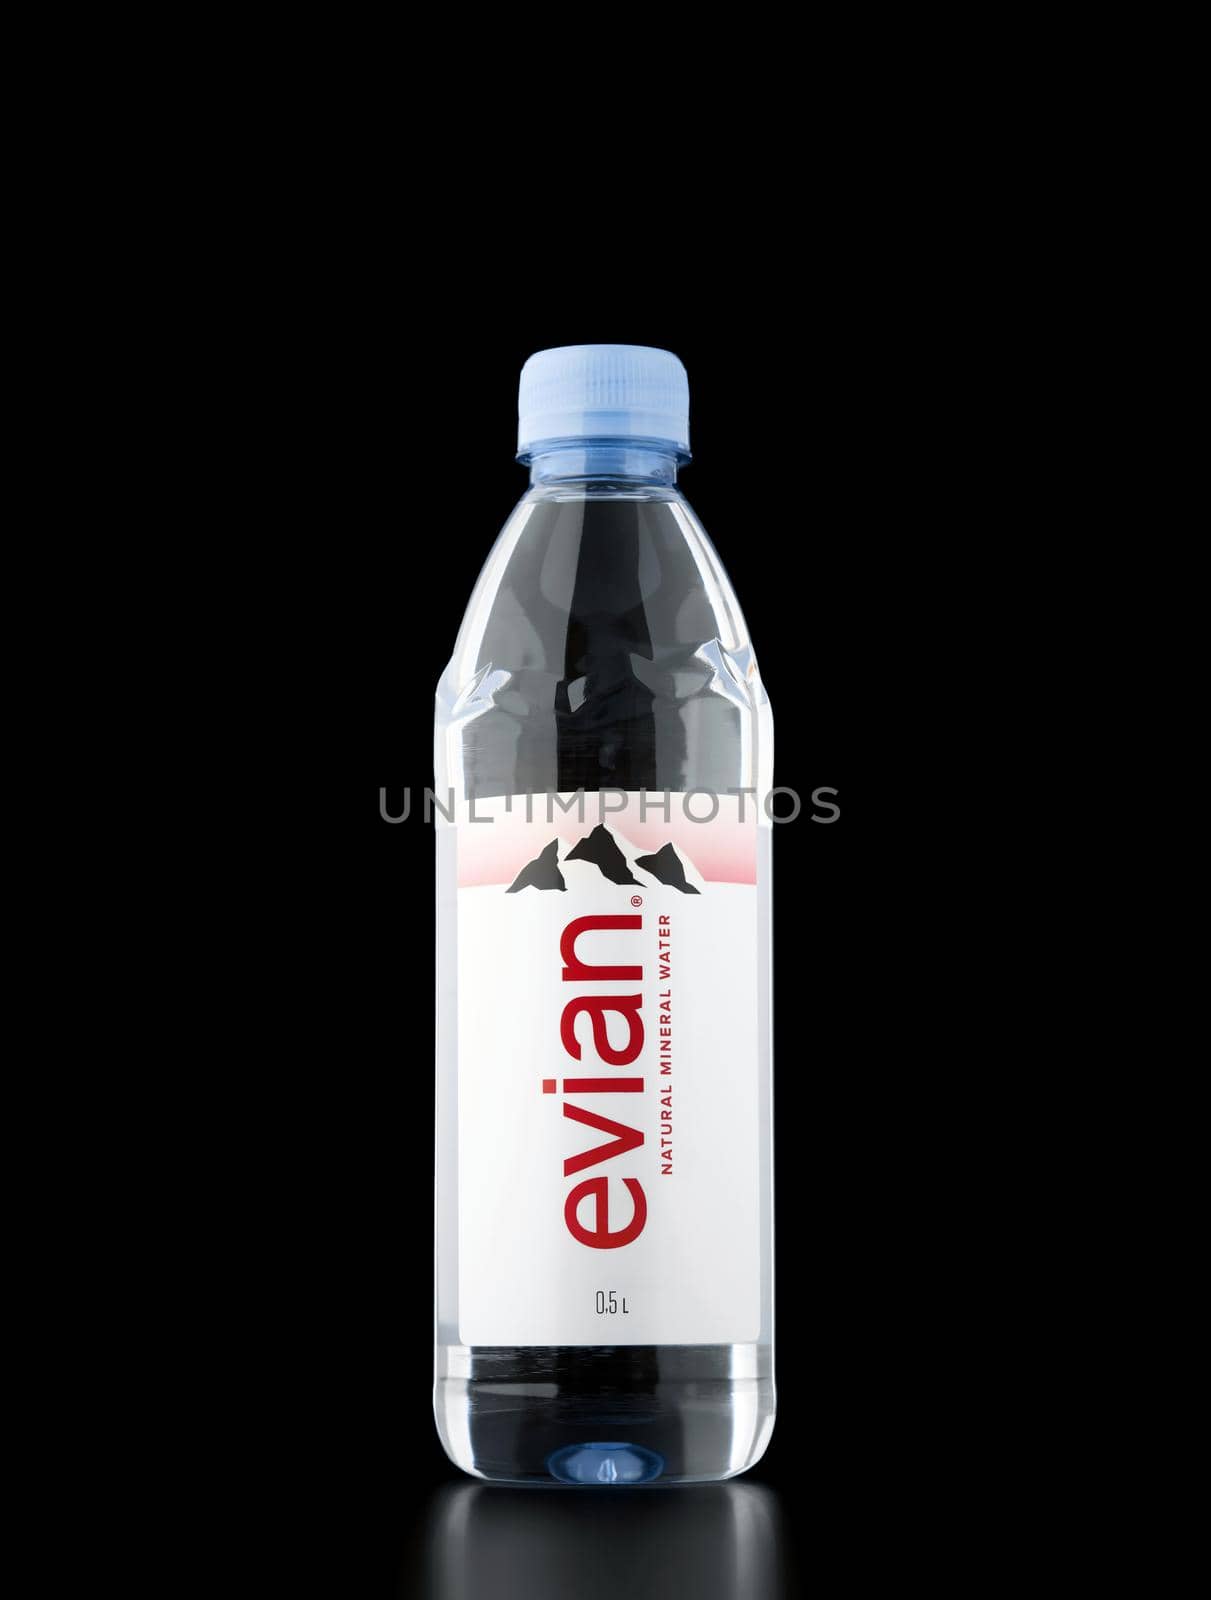 Evian Natural Mineral Water on the black background. Evian is a brand of mineral water coming from several sources near Evian les Bains. 26.12.2021, Rostov region, Russia by EvgeniyQW